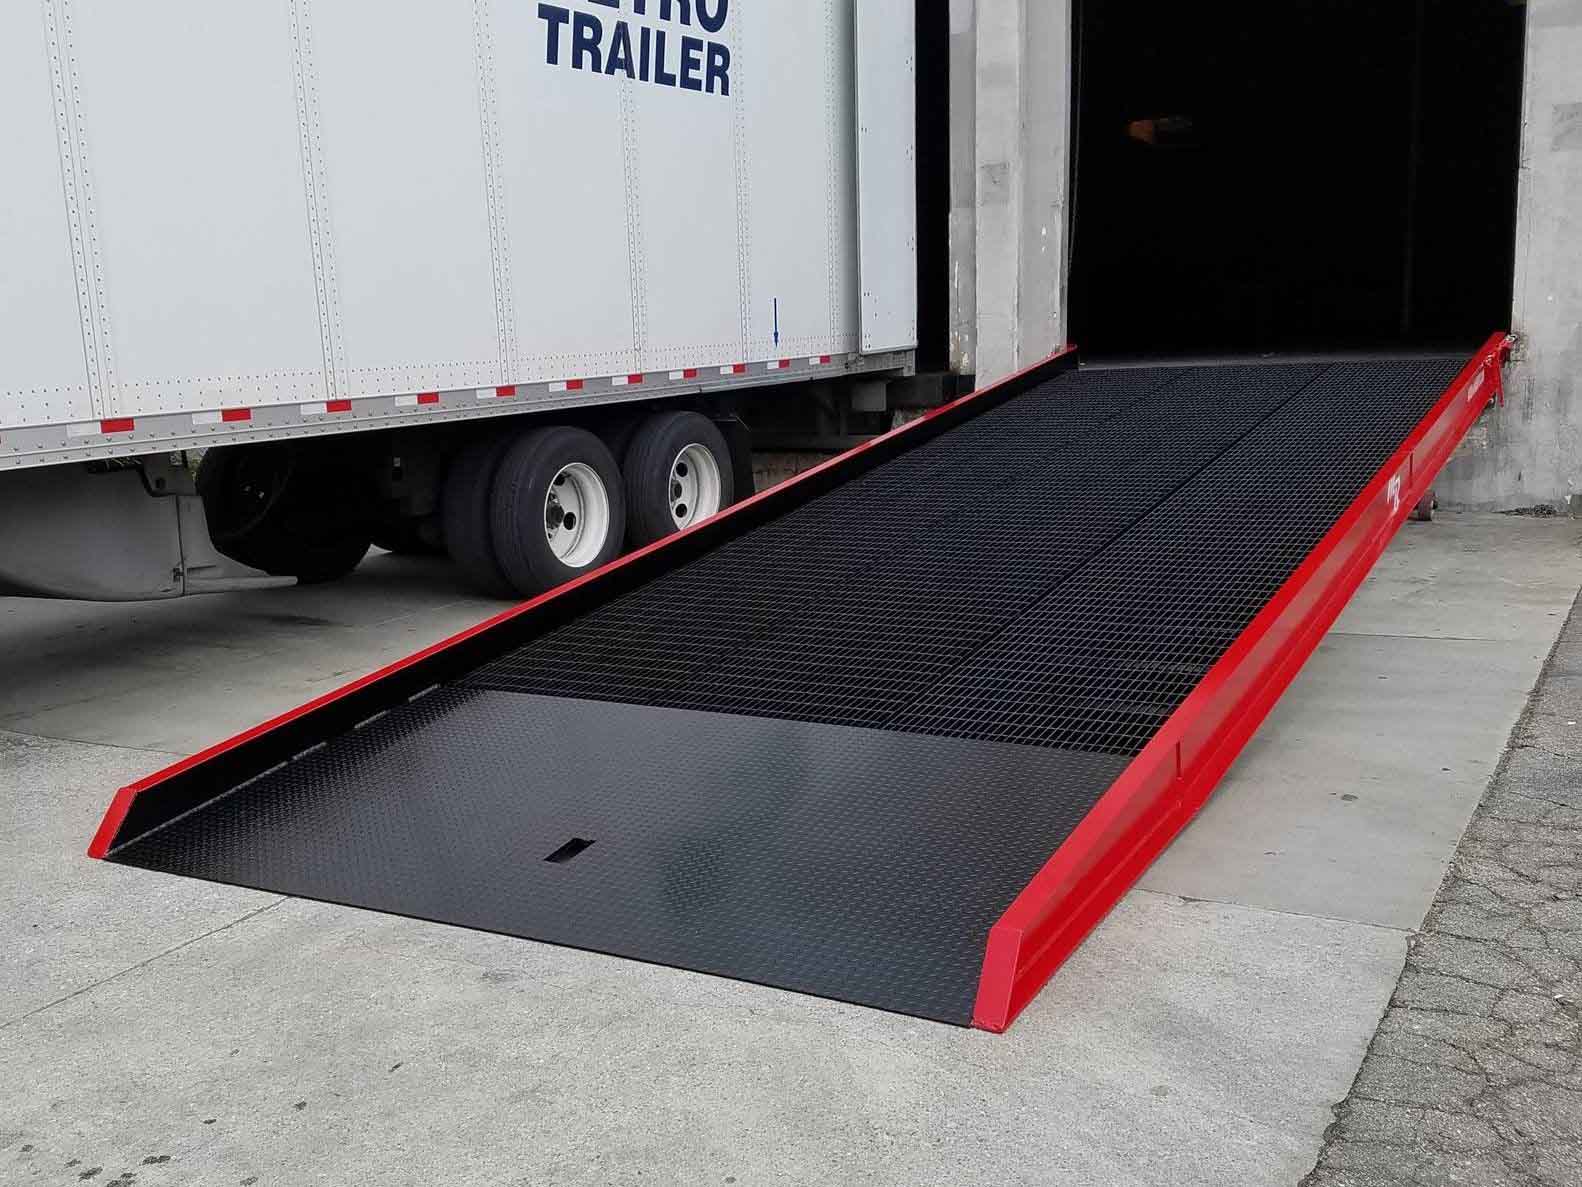 A Medlin Ramp leaning against a loading dock next to a semi-truck.